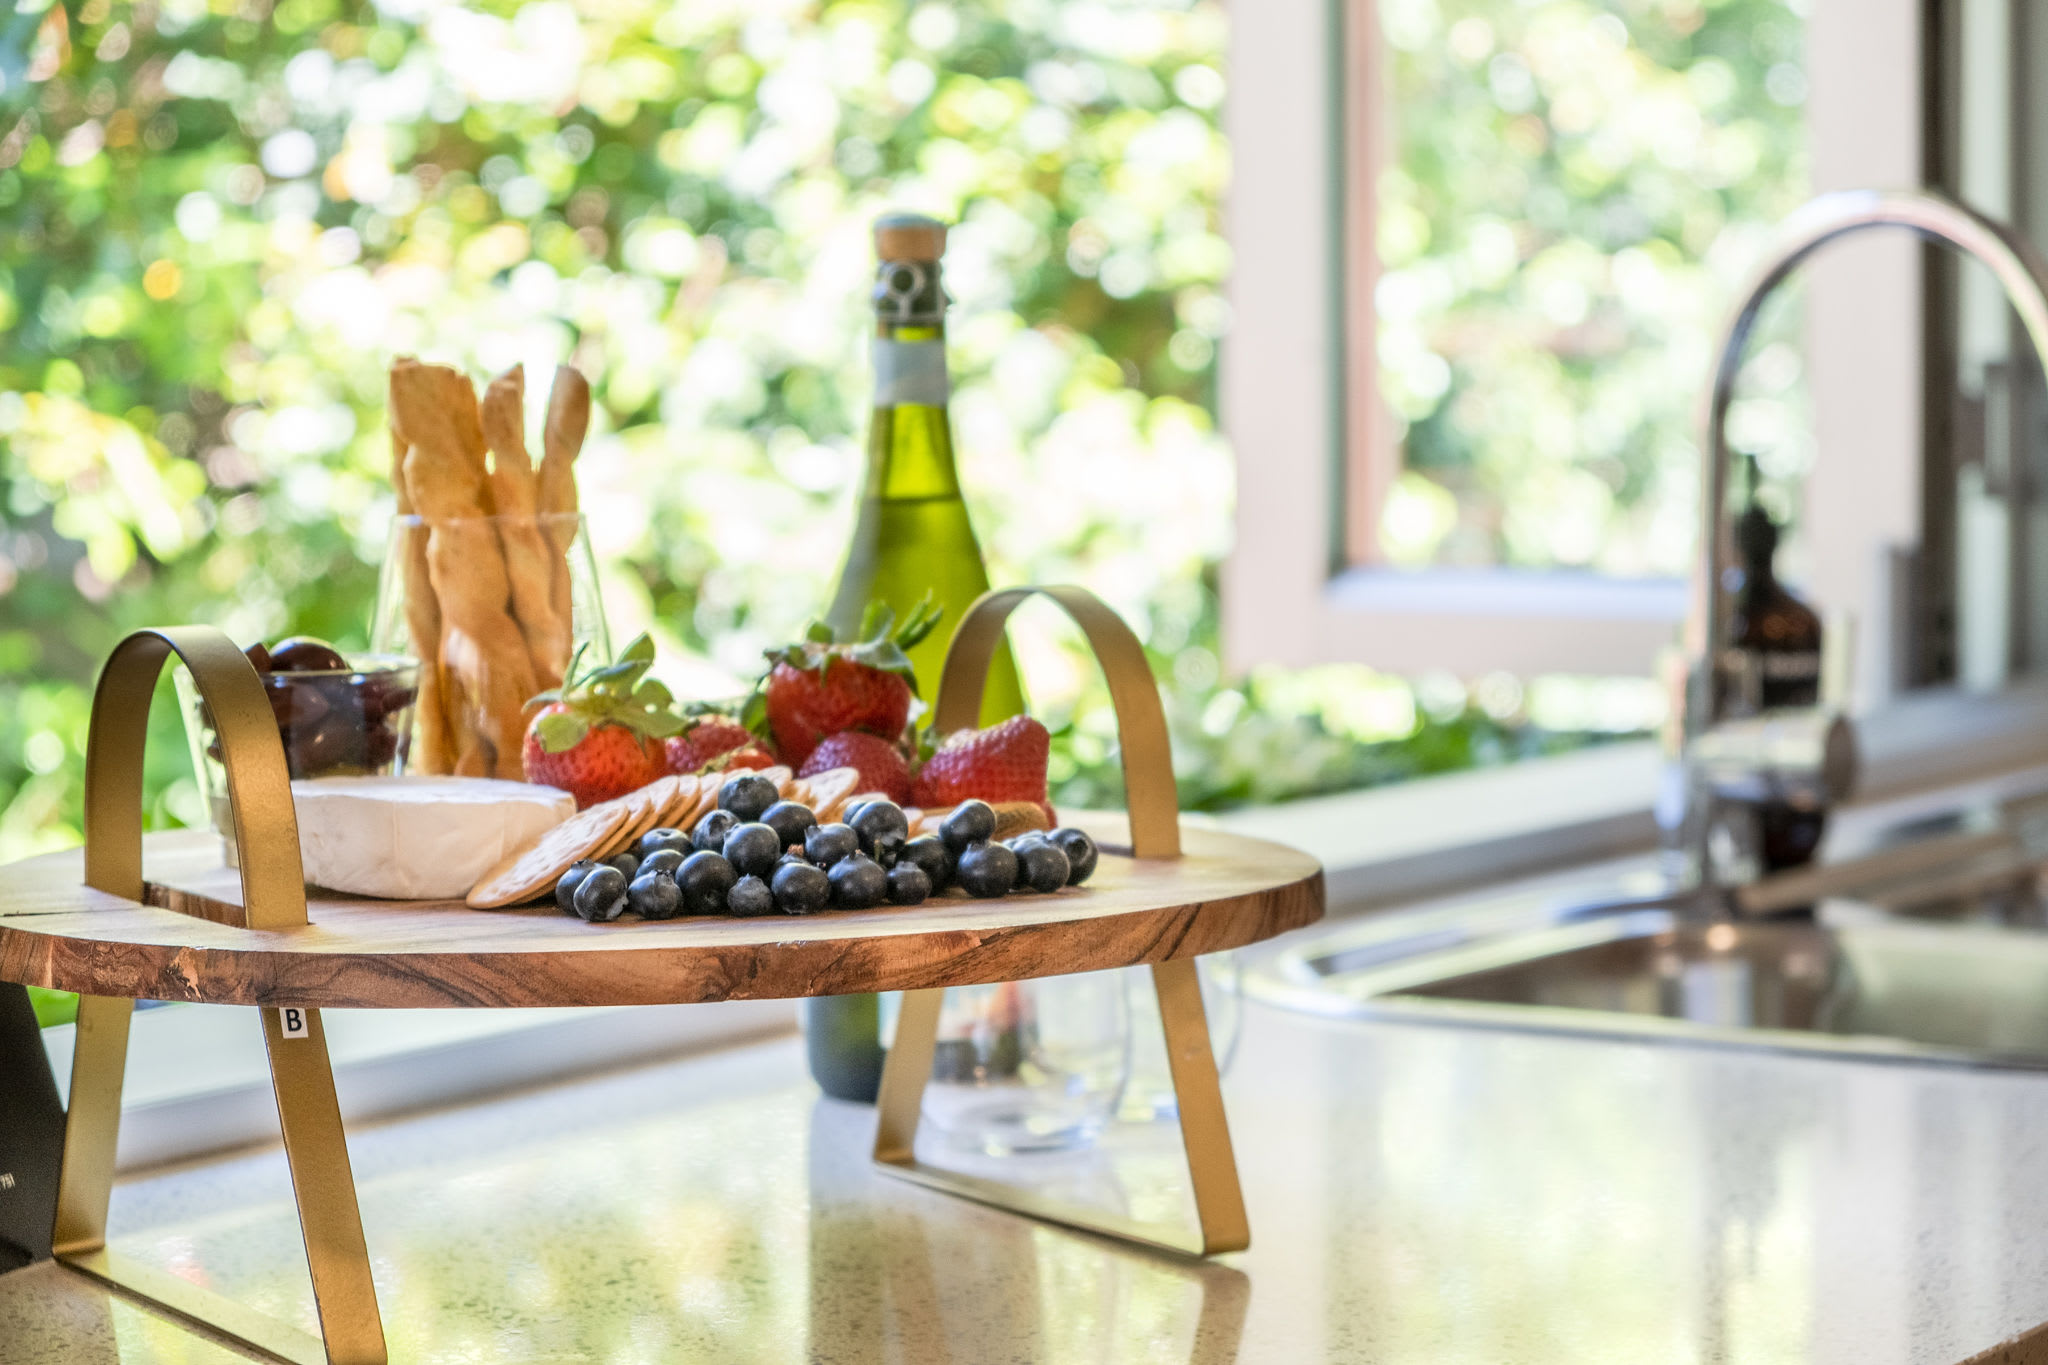 Take the time to sit back with some snacks and a glass of wine in the fresh air outside.